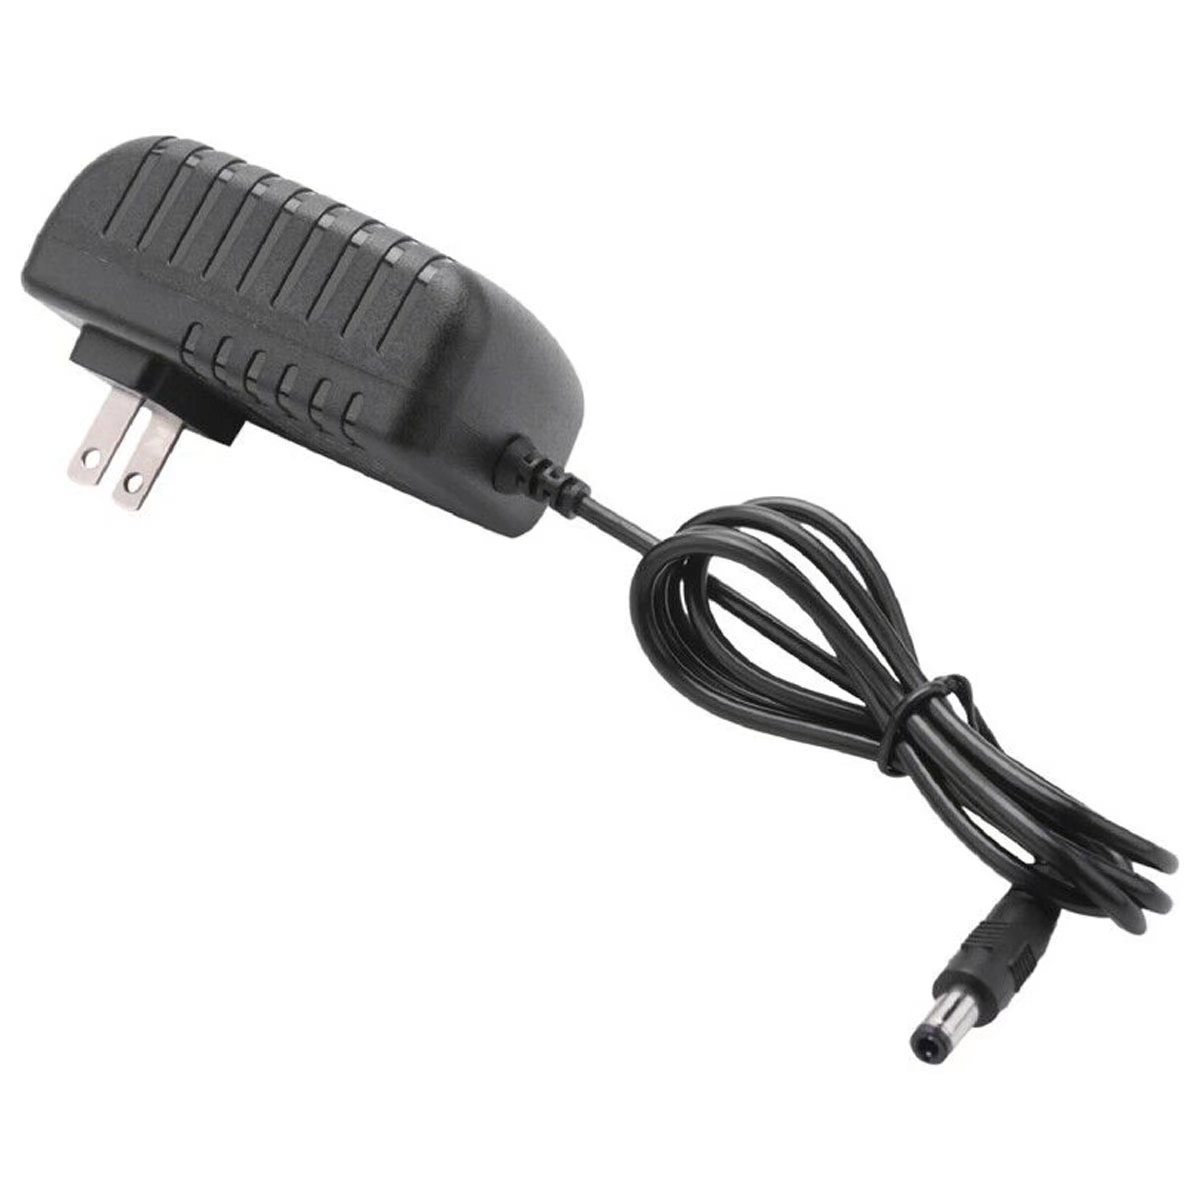 AC Adapter Charger for 18V Legiral Le9 Pro (NOT fit 24V Version) Massage Gun Deep Tissue Body Muscle Percussi - image 4 of 4